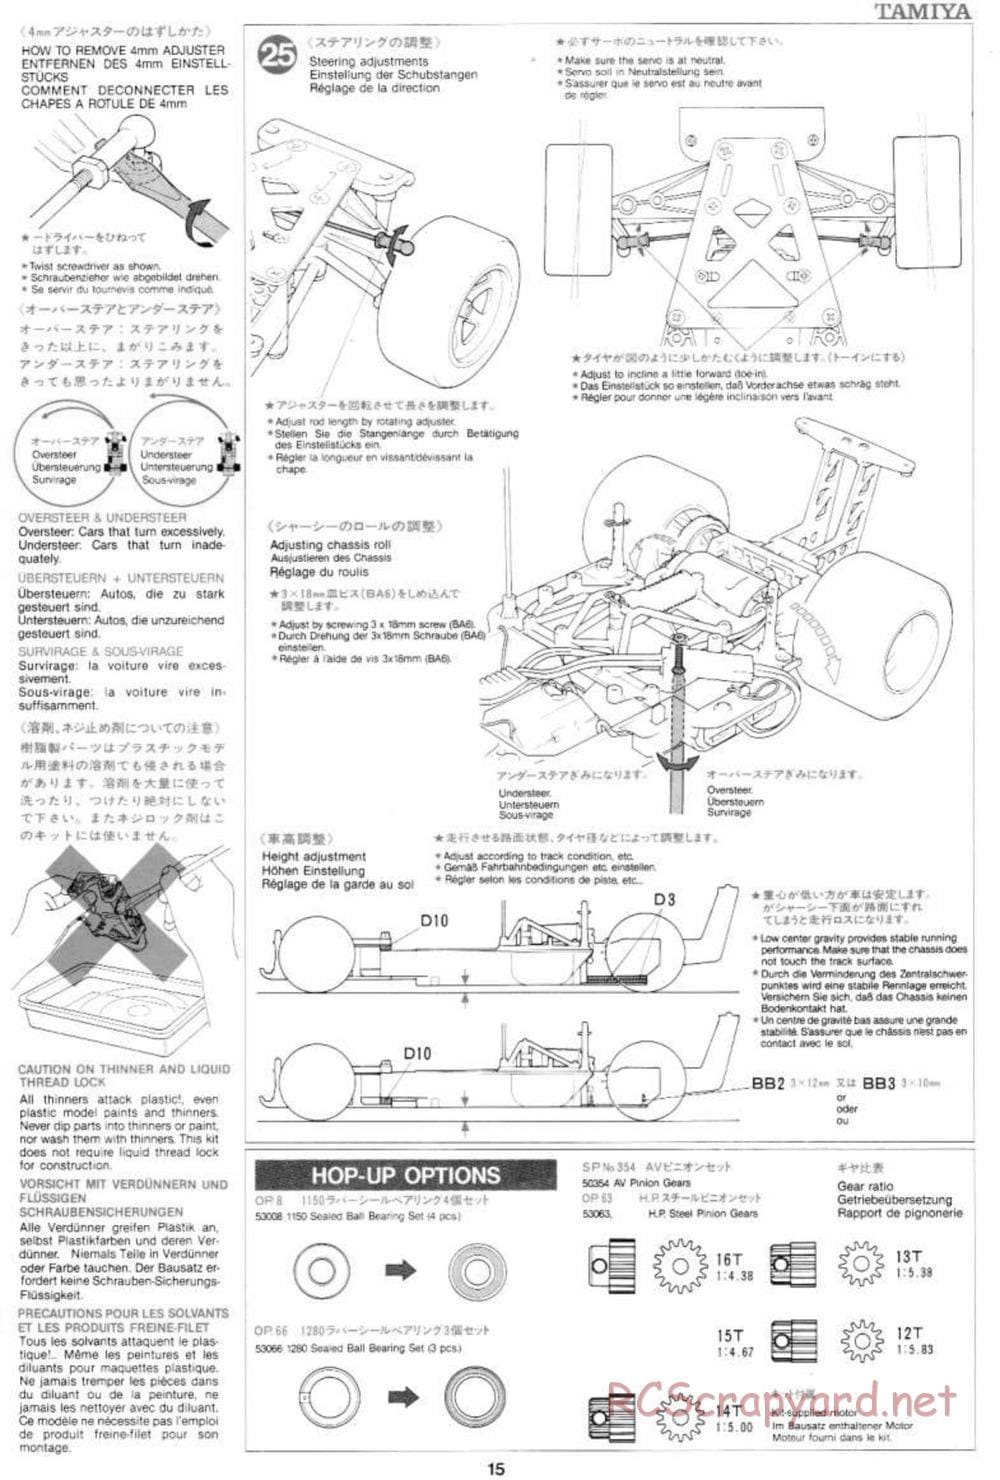 Tamiya - Mercedes-Benz C11 - Group-C Chassis - Manual - Page 15